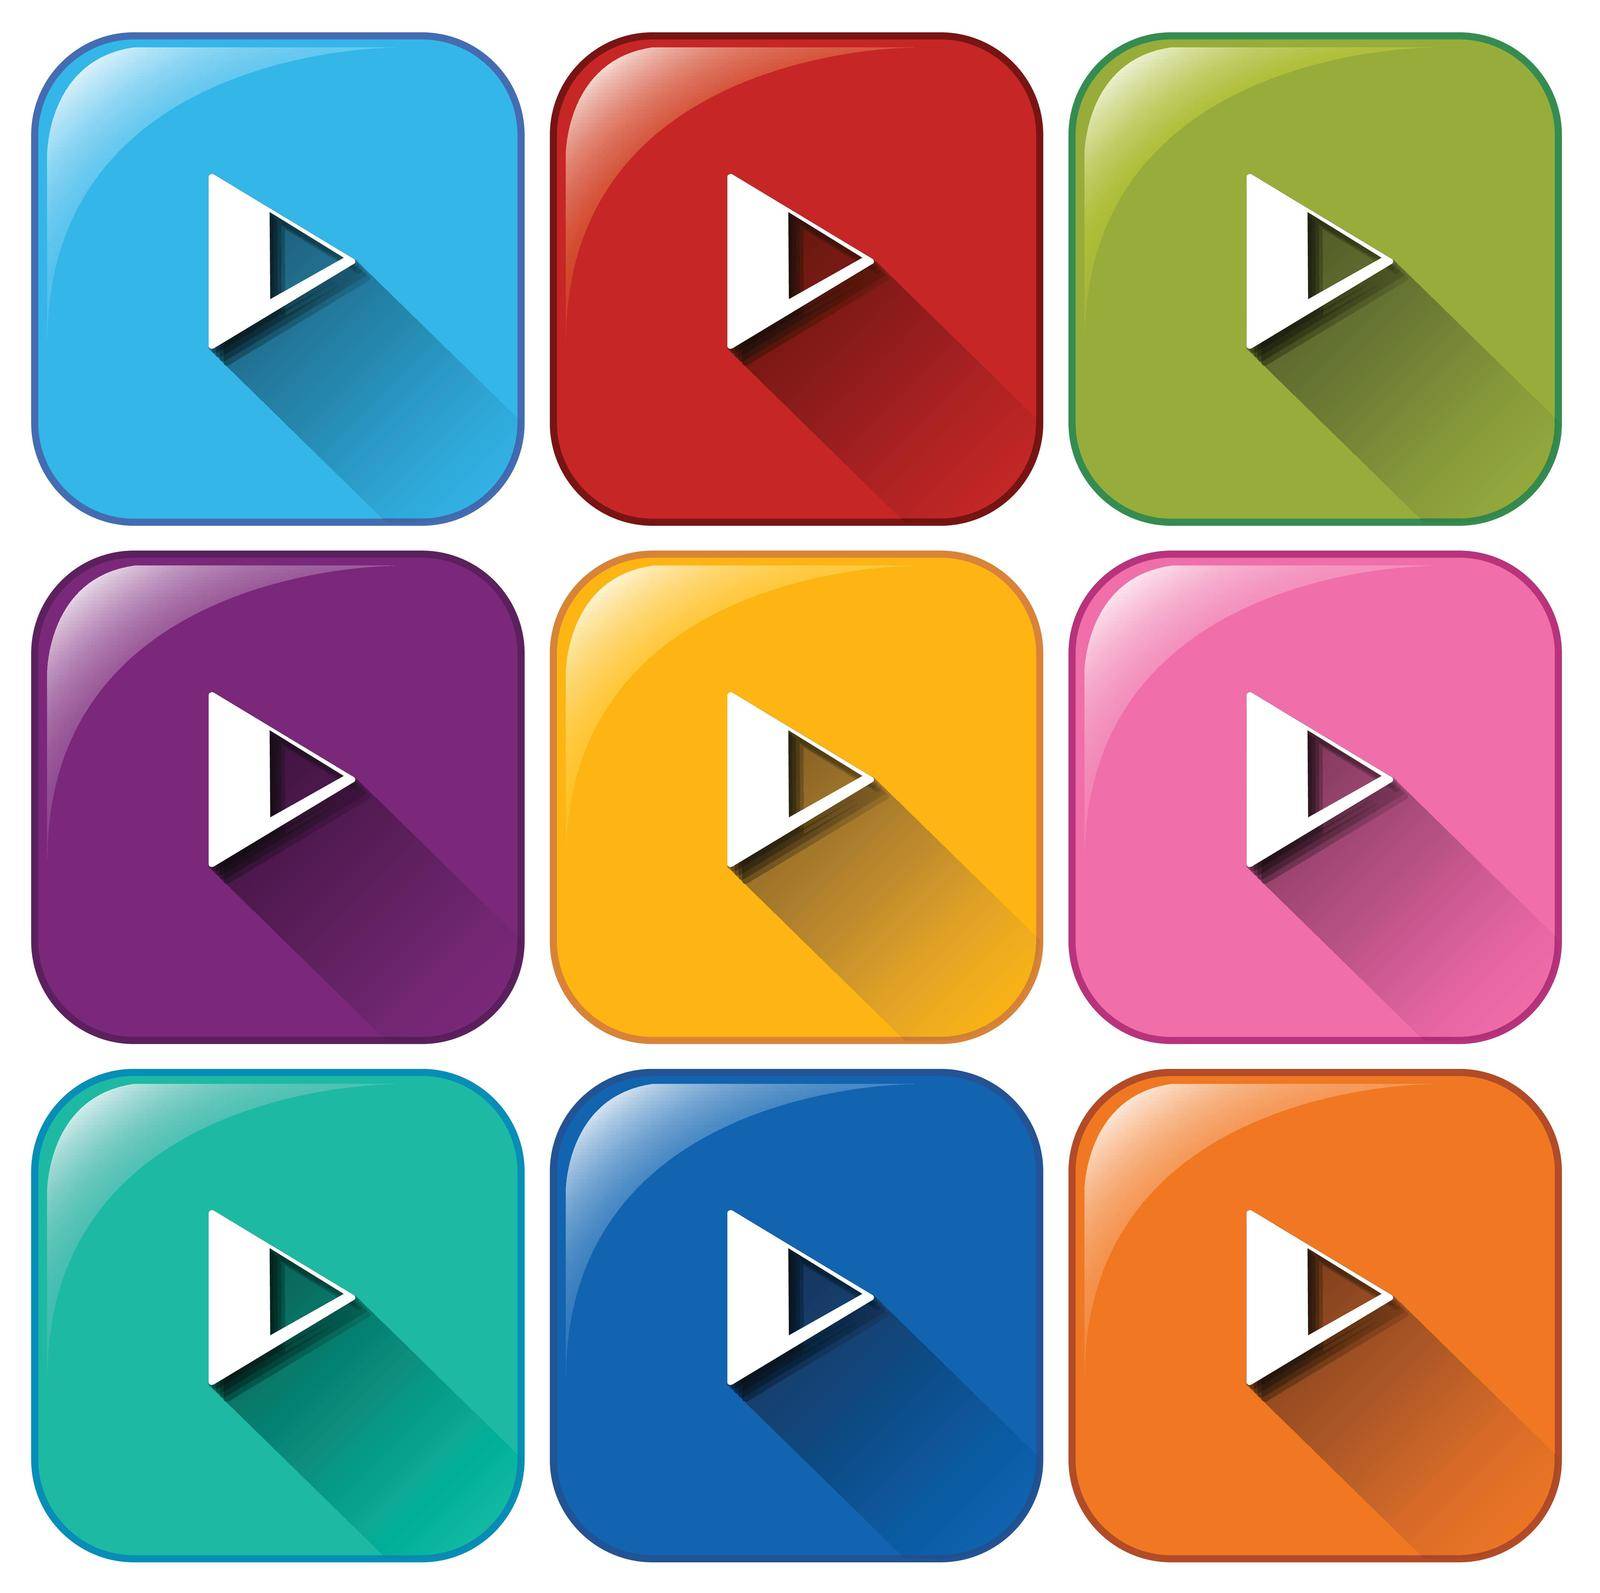 Play button icons by iimages